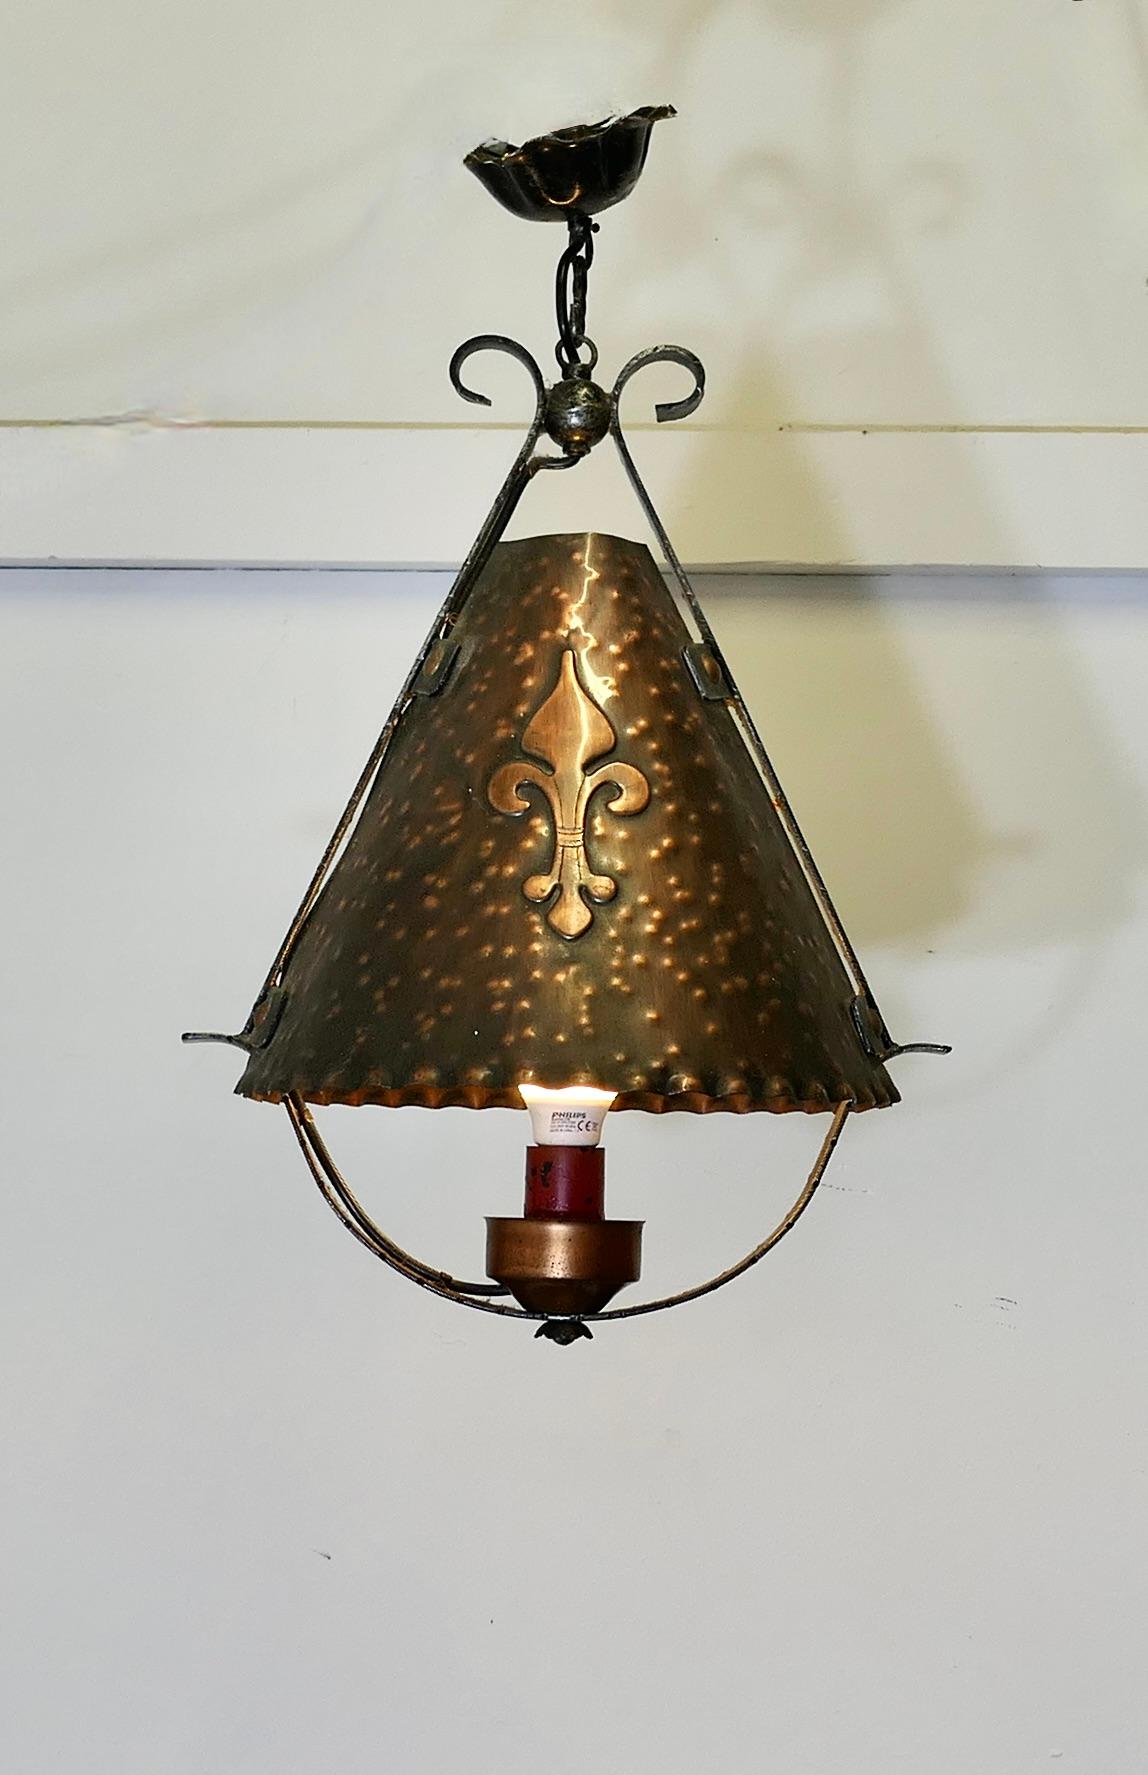 French Arts and Crafts Gothic Copper Lantern

A very unusual light, the light is a Conical shape and made in hand beaten copper with a large Fleure de Lys emblem on each side. The shade sits in a wrought iron frame which hangs from an iron ceiling